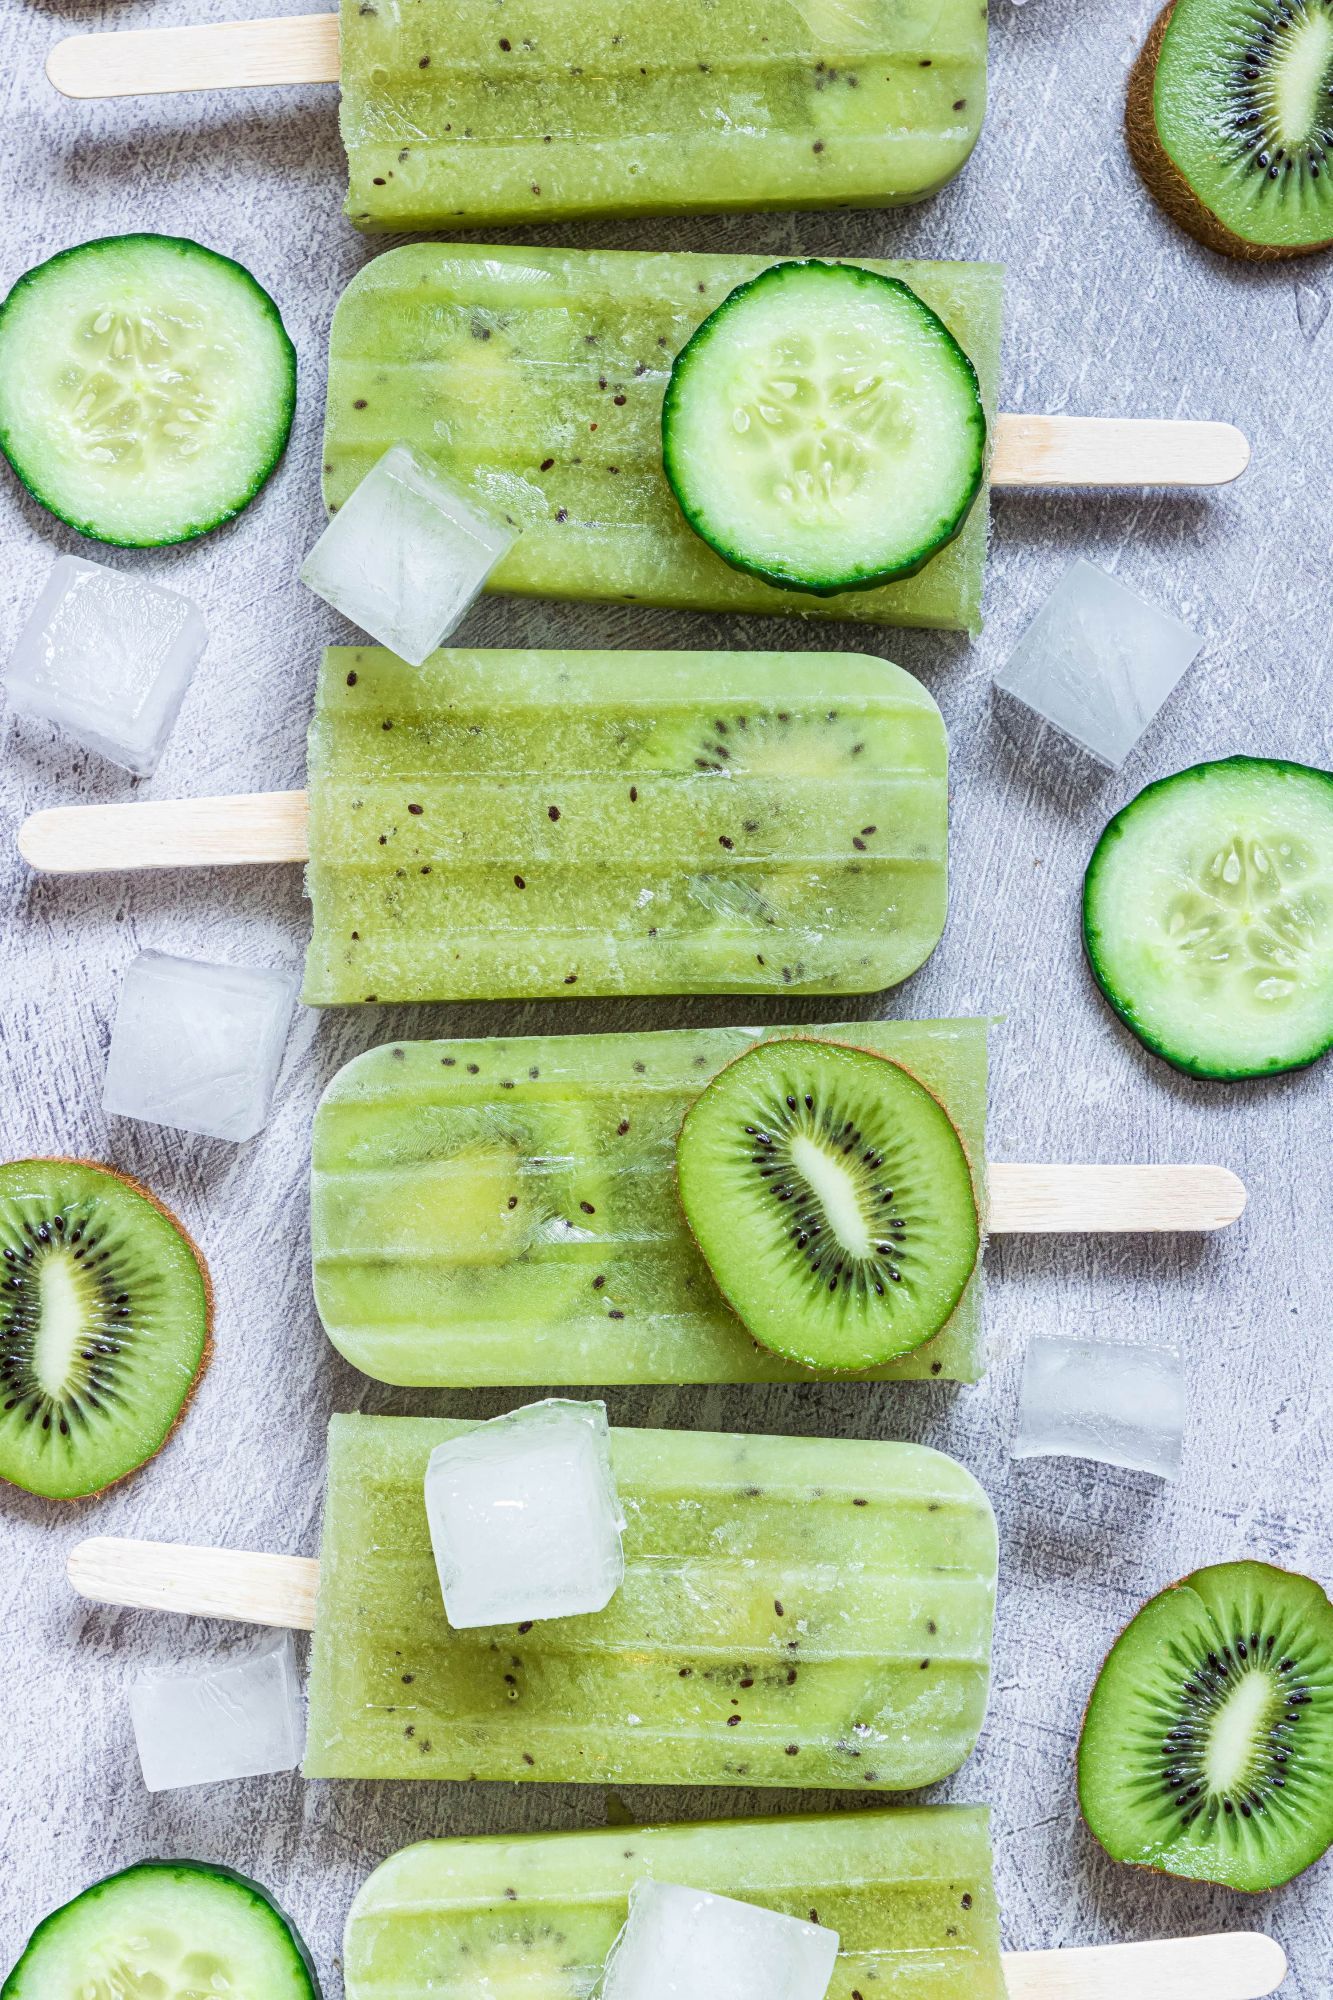 Cucumber popsicles with fresh kiwi frozen on a board with cucumber slices.